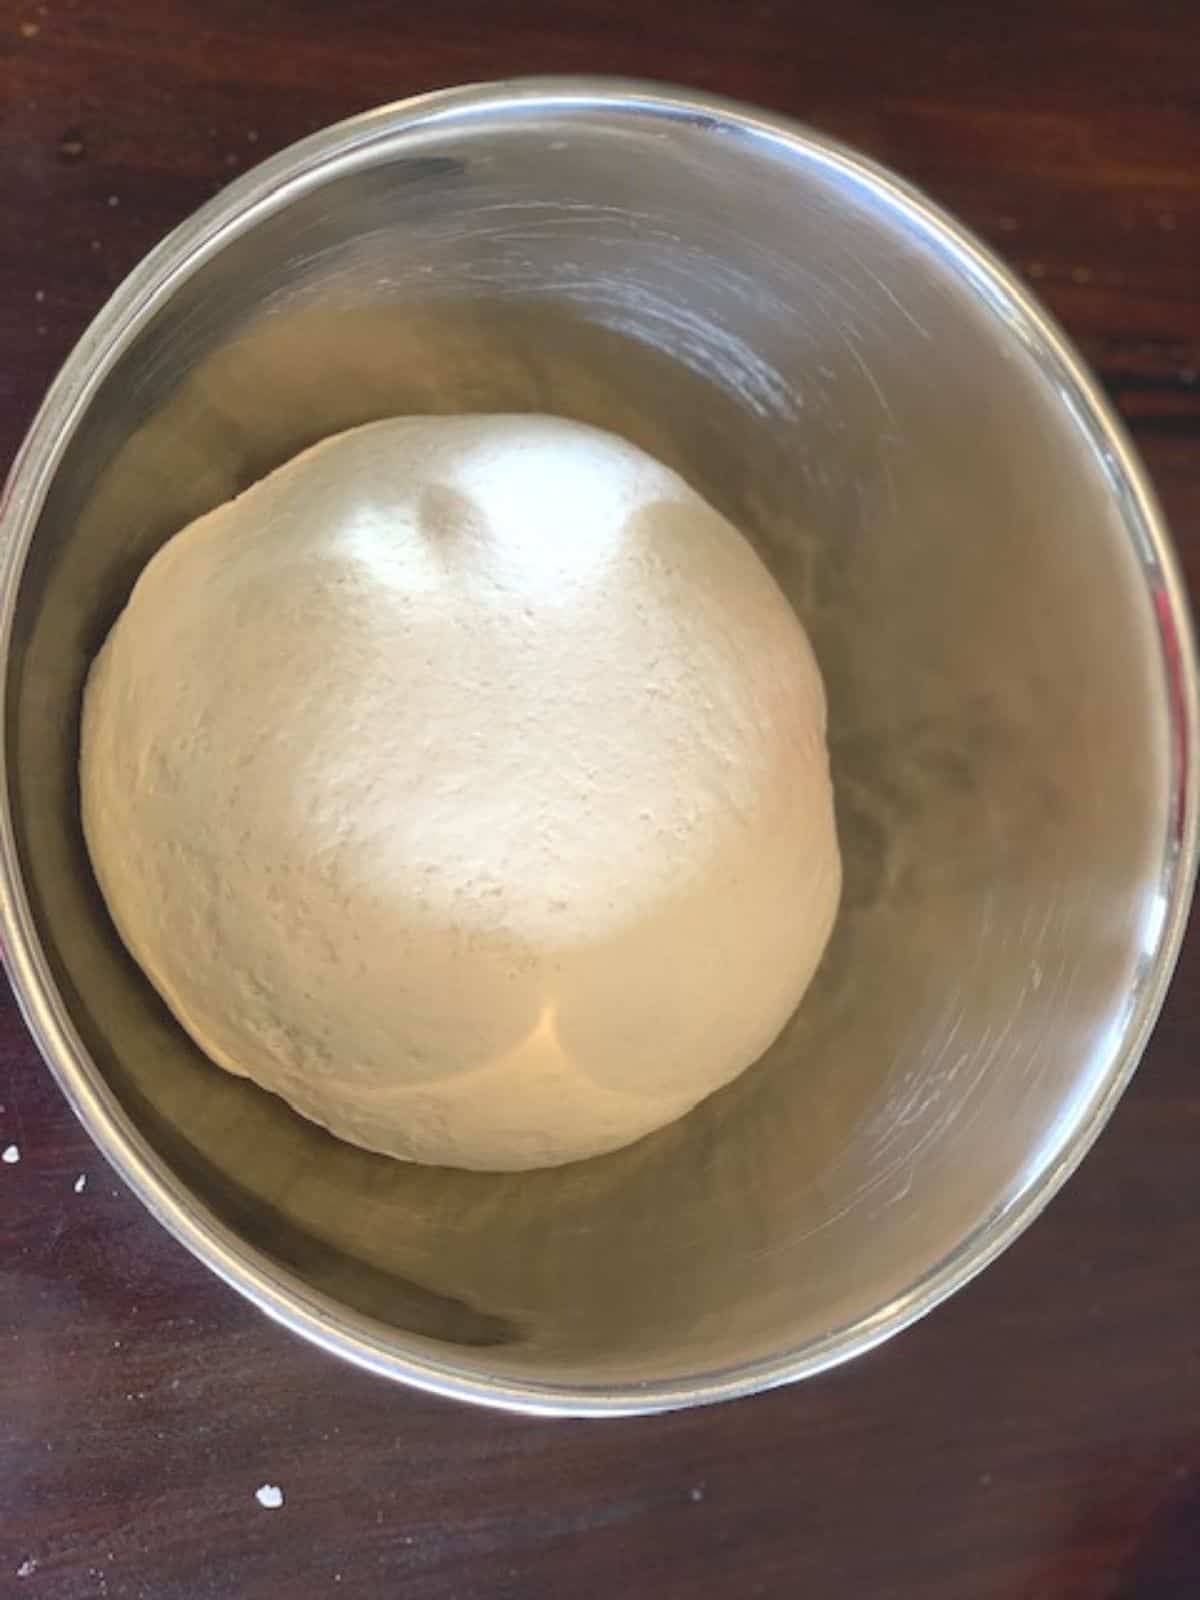 Bread dough in a stainless steel bowl on a dark wooden tabletop